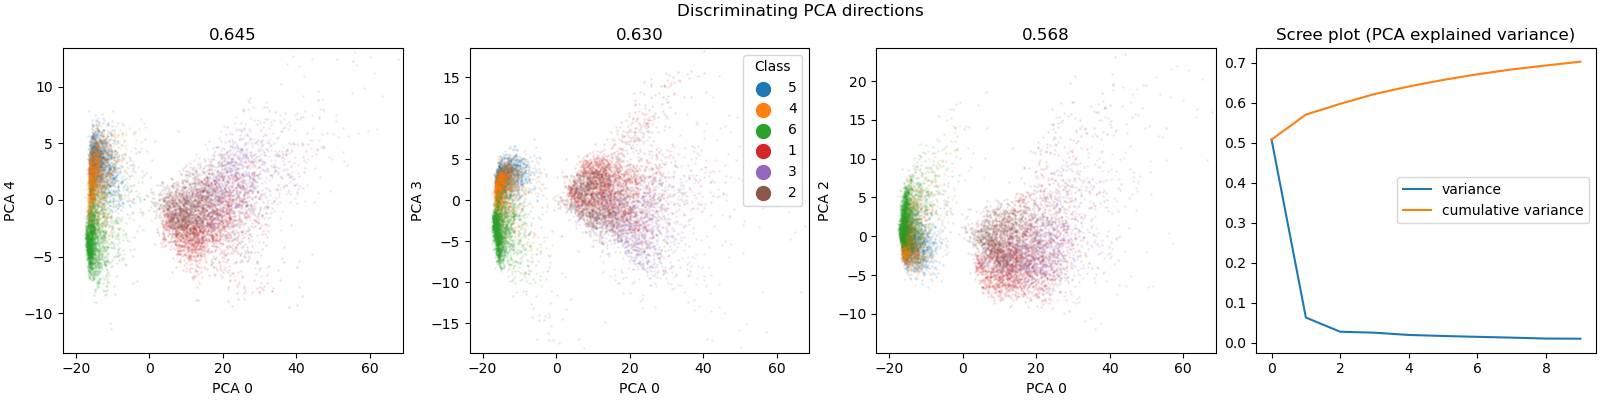 Discriminating PCA directions, 0.645, 0.630, 0.568, Scree plot (PCA explained variance)